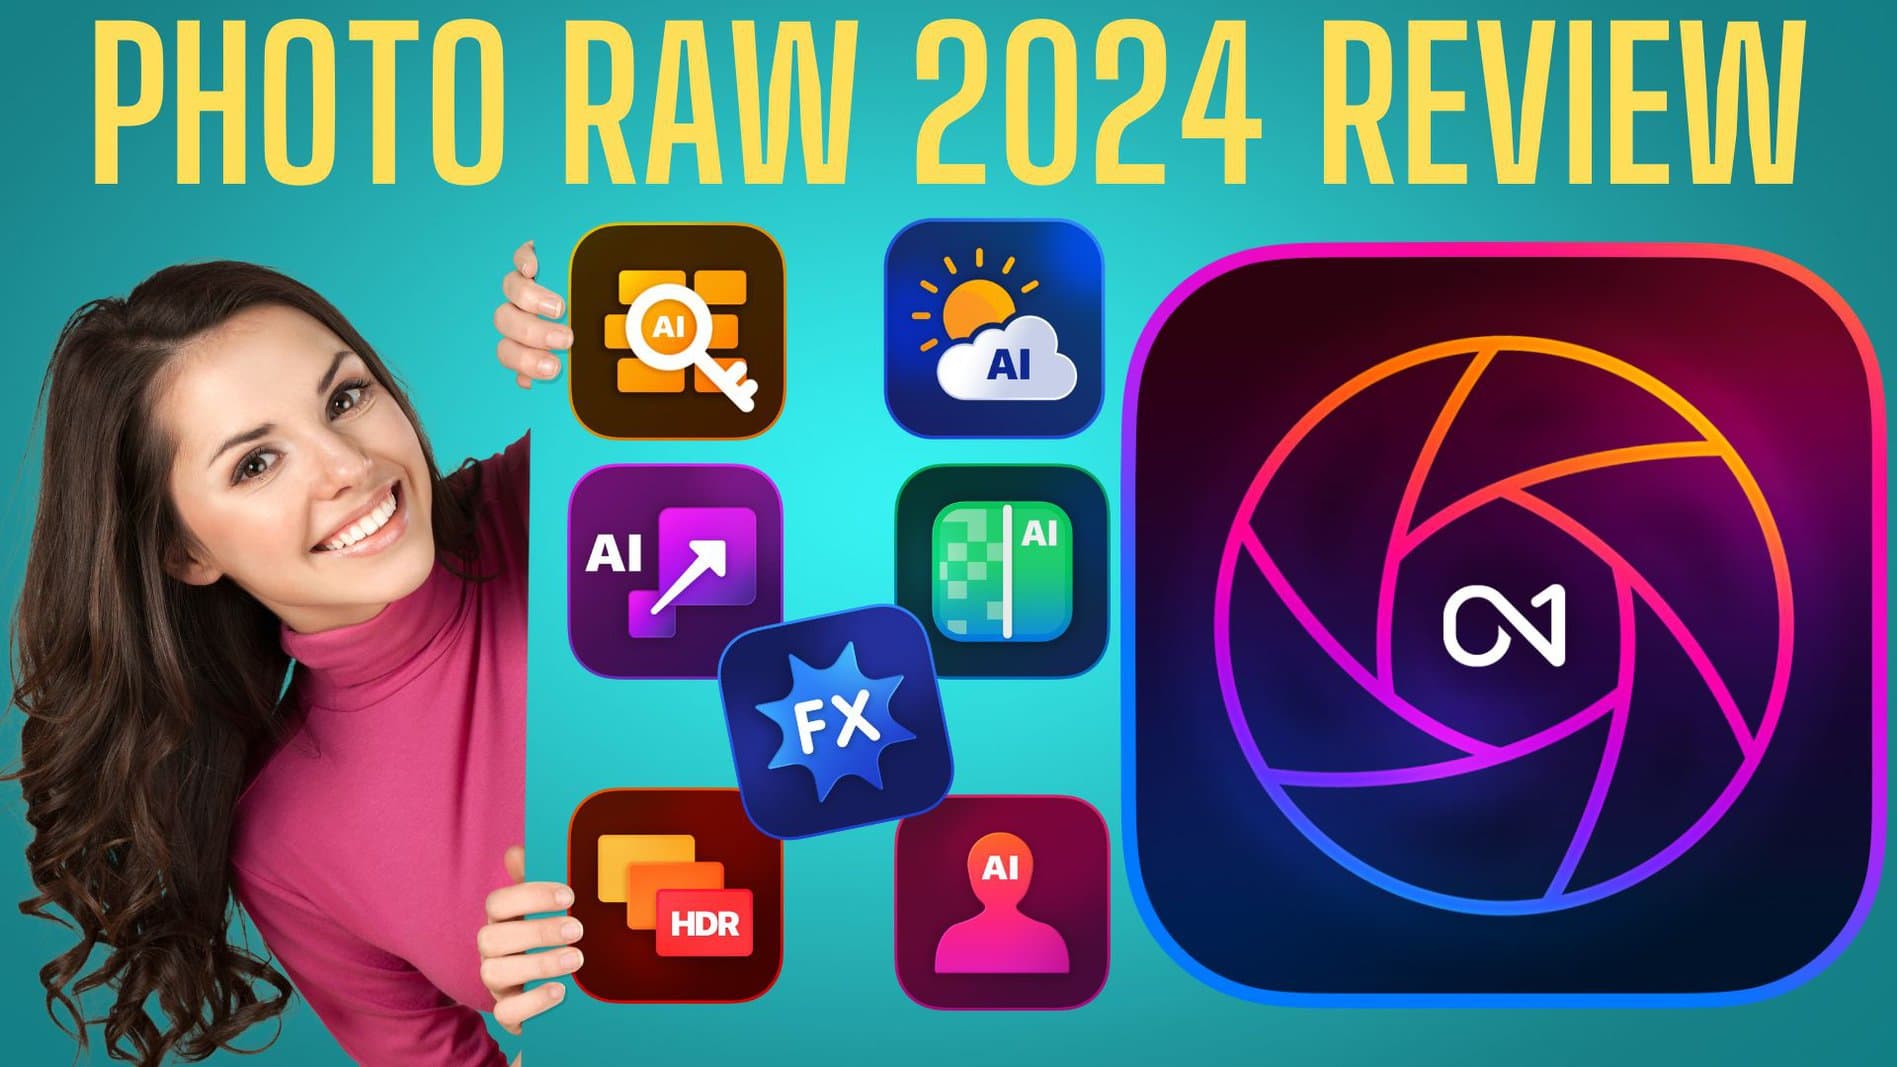 ON1 Photo Raw 2024 Logo and other feature logos including a woman smiling.